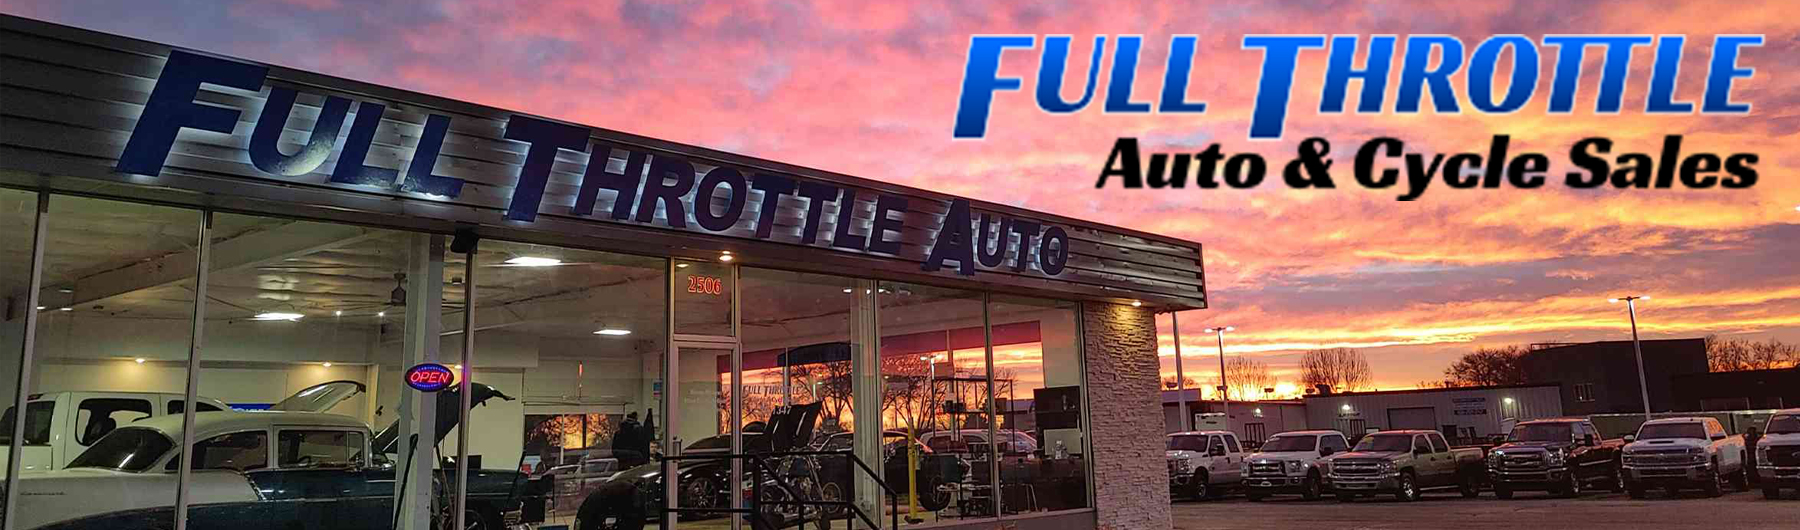 Full Throttle Auto & Cycle Sales